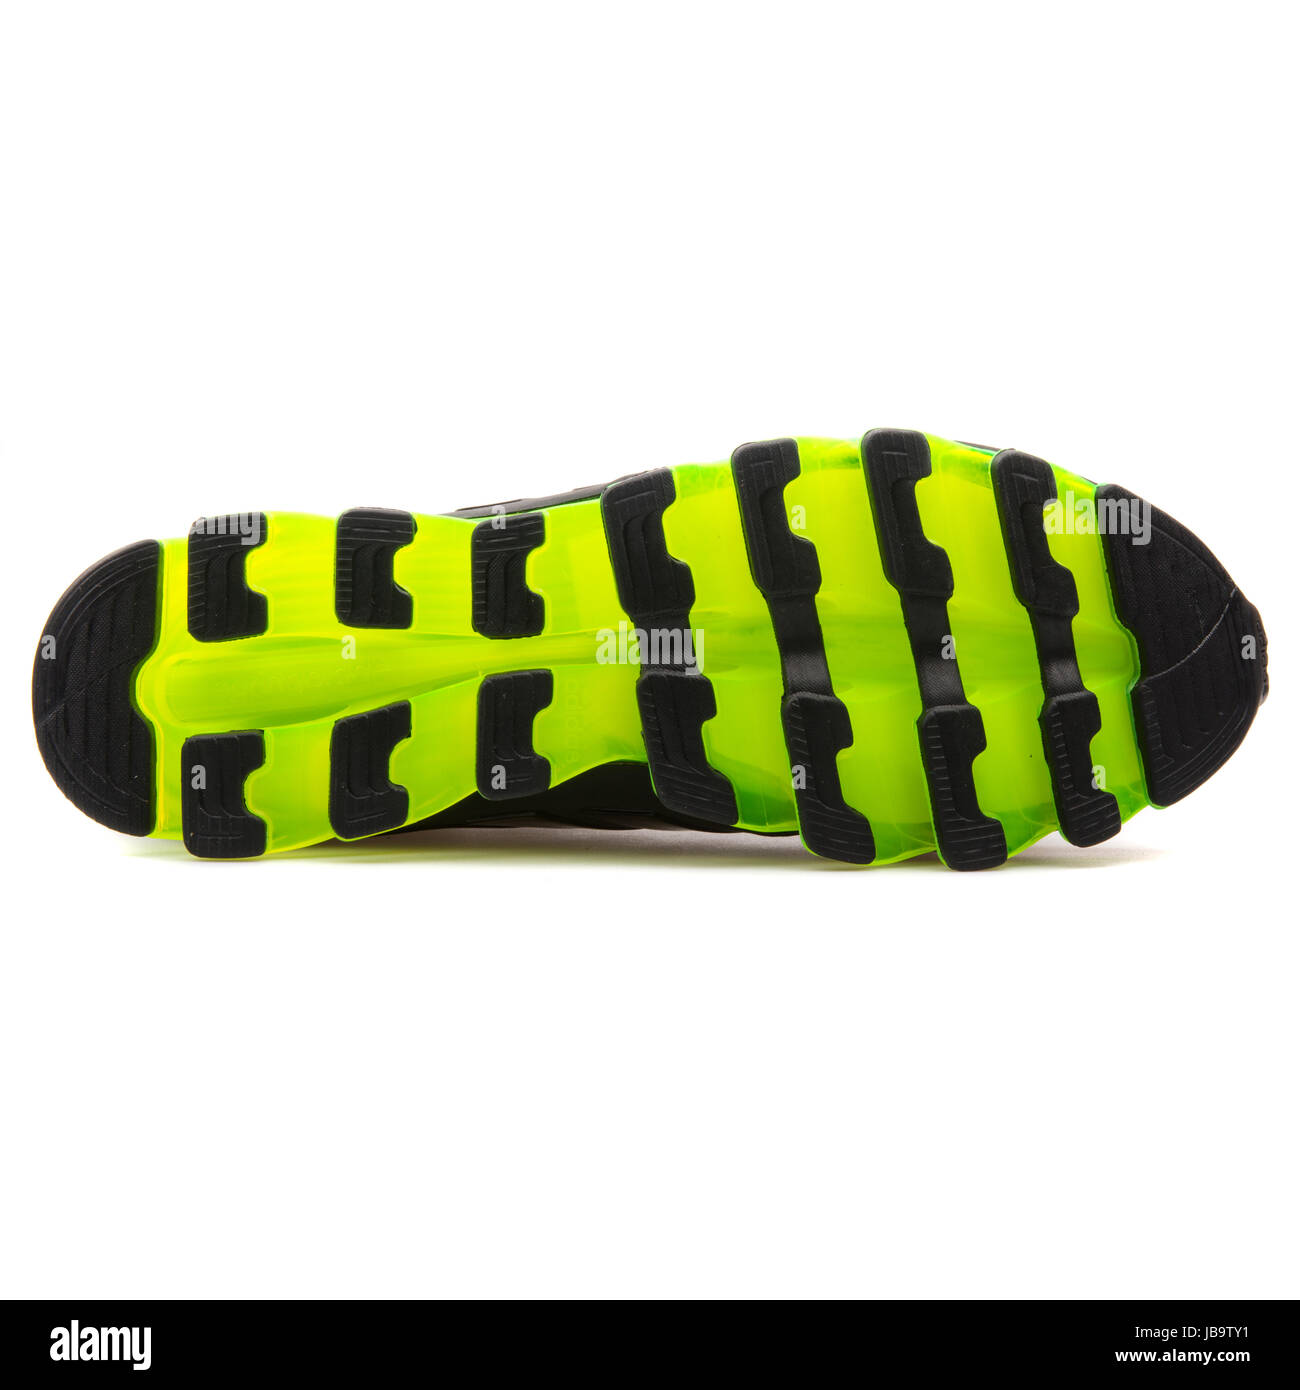 Adidas Springblade Drive 2 m Black and Green Men's Running Sneakers -  D69684 Stock Photo - Alamy